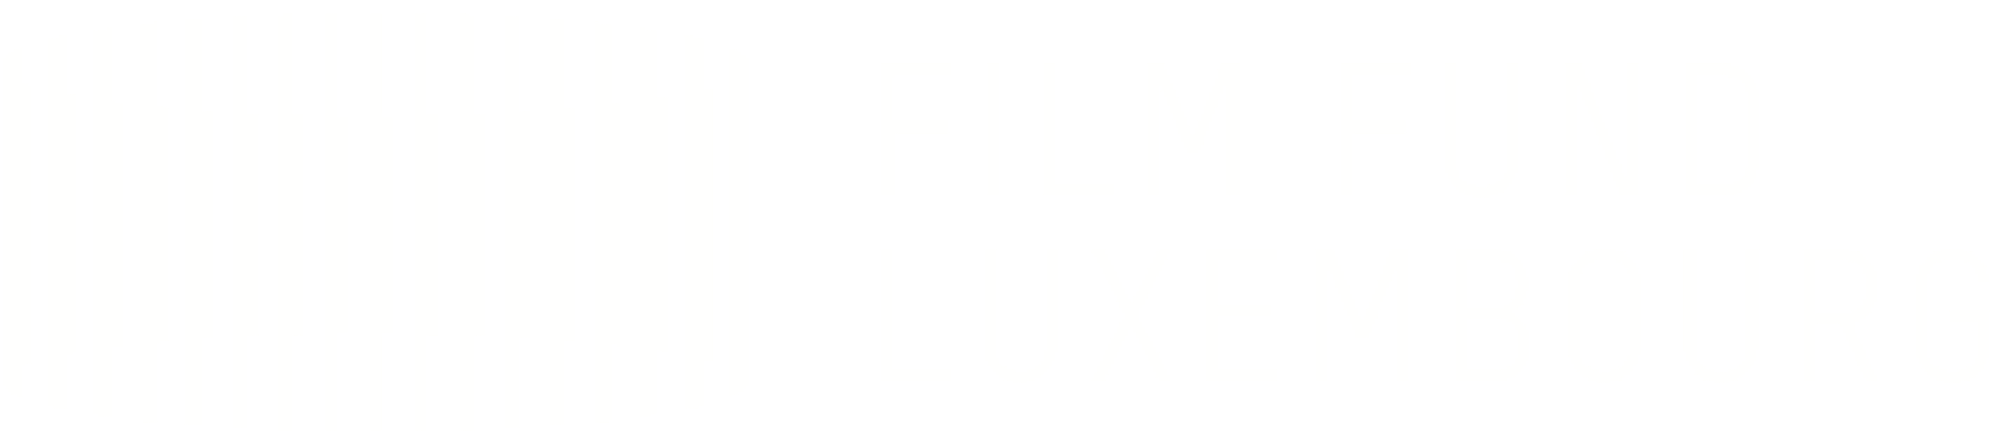 Le Film Fund Luxembourg